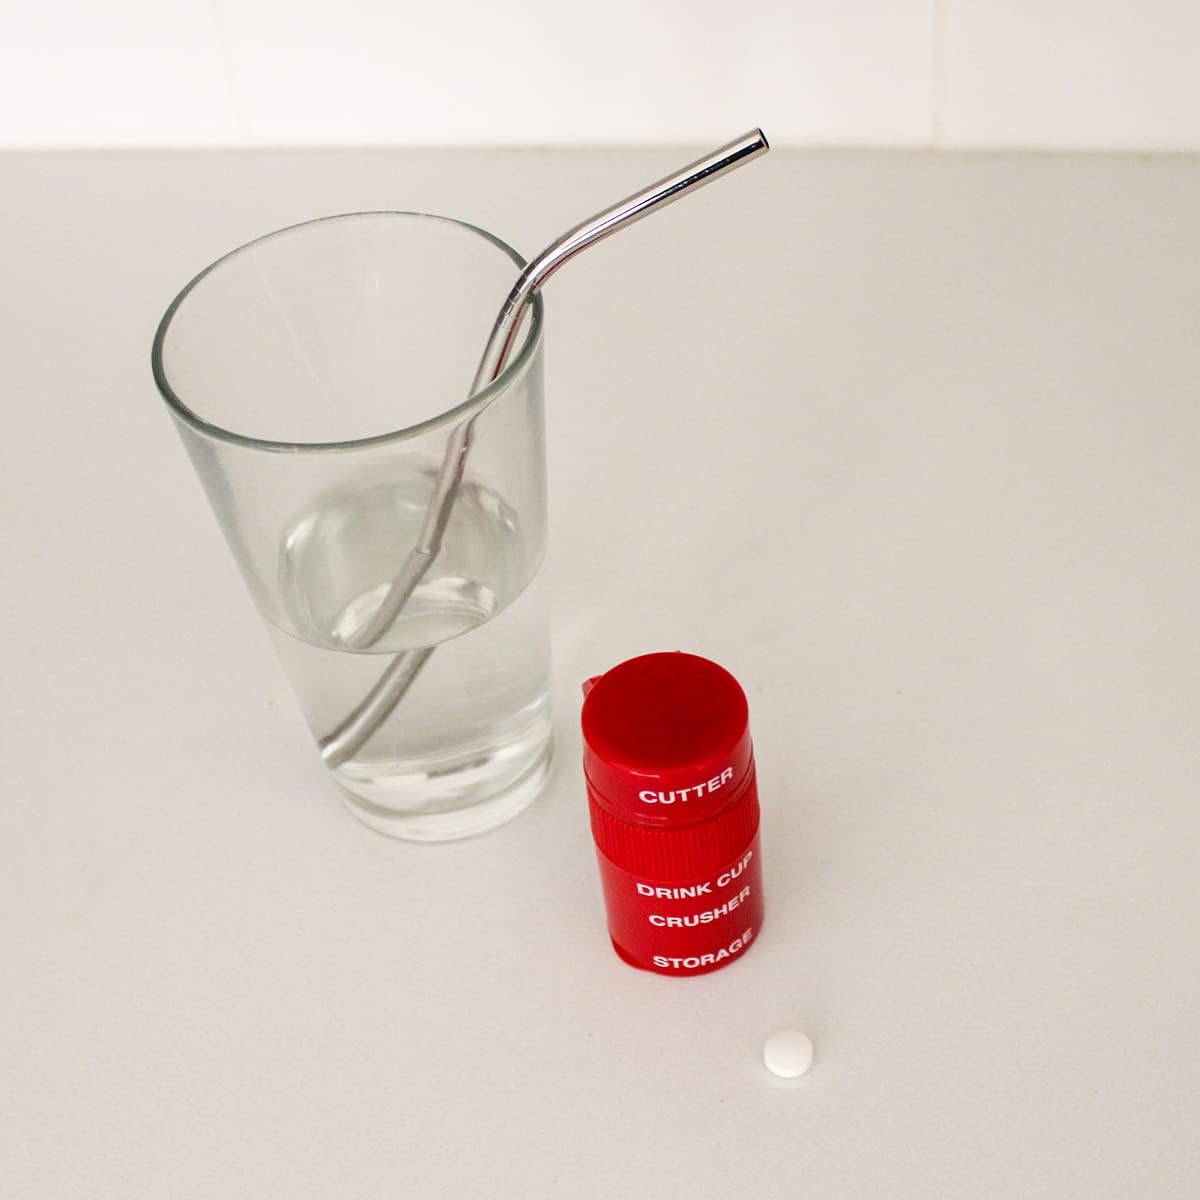 Ezy Dose Pill Crusher, Cutter and Grinder, Crushes Pills, Vitamins, Tablets, Stainless Steel Blade, Removable Drinking Cup, Red